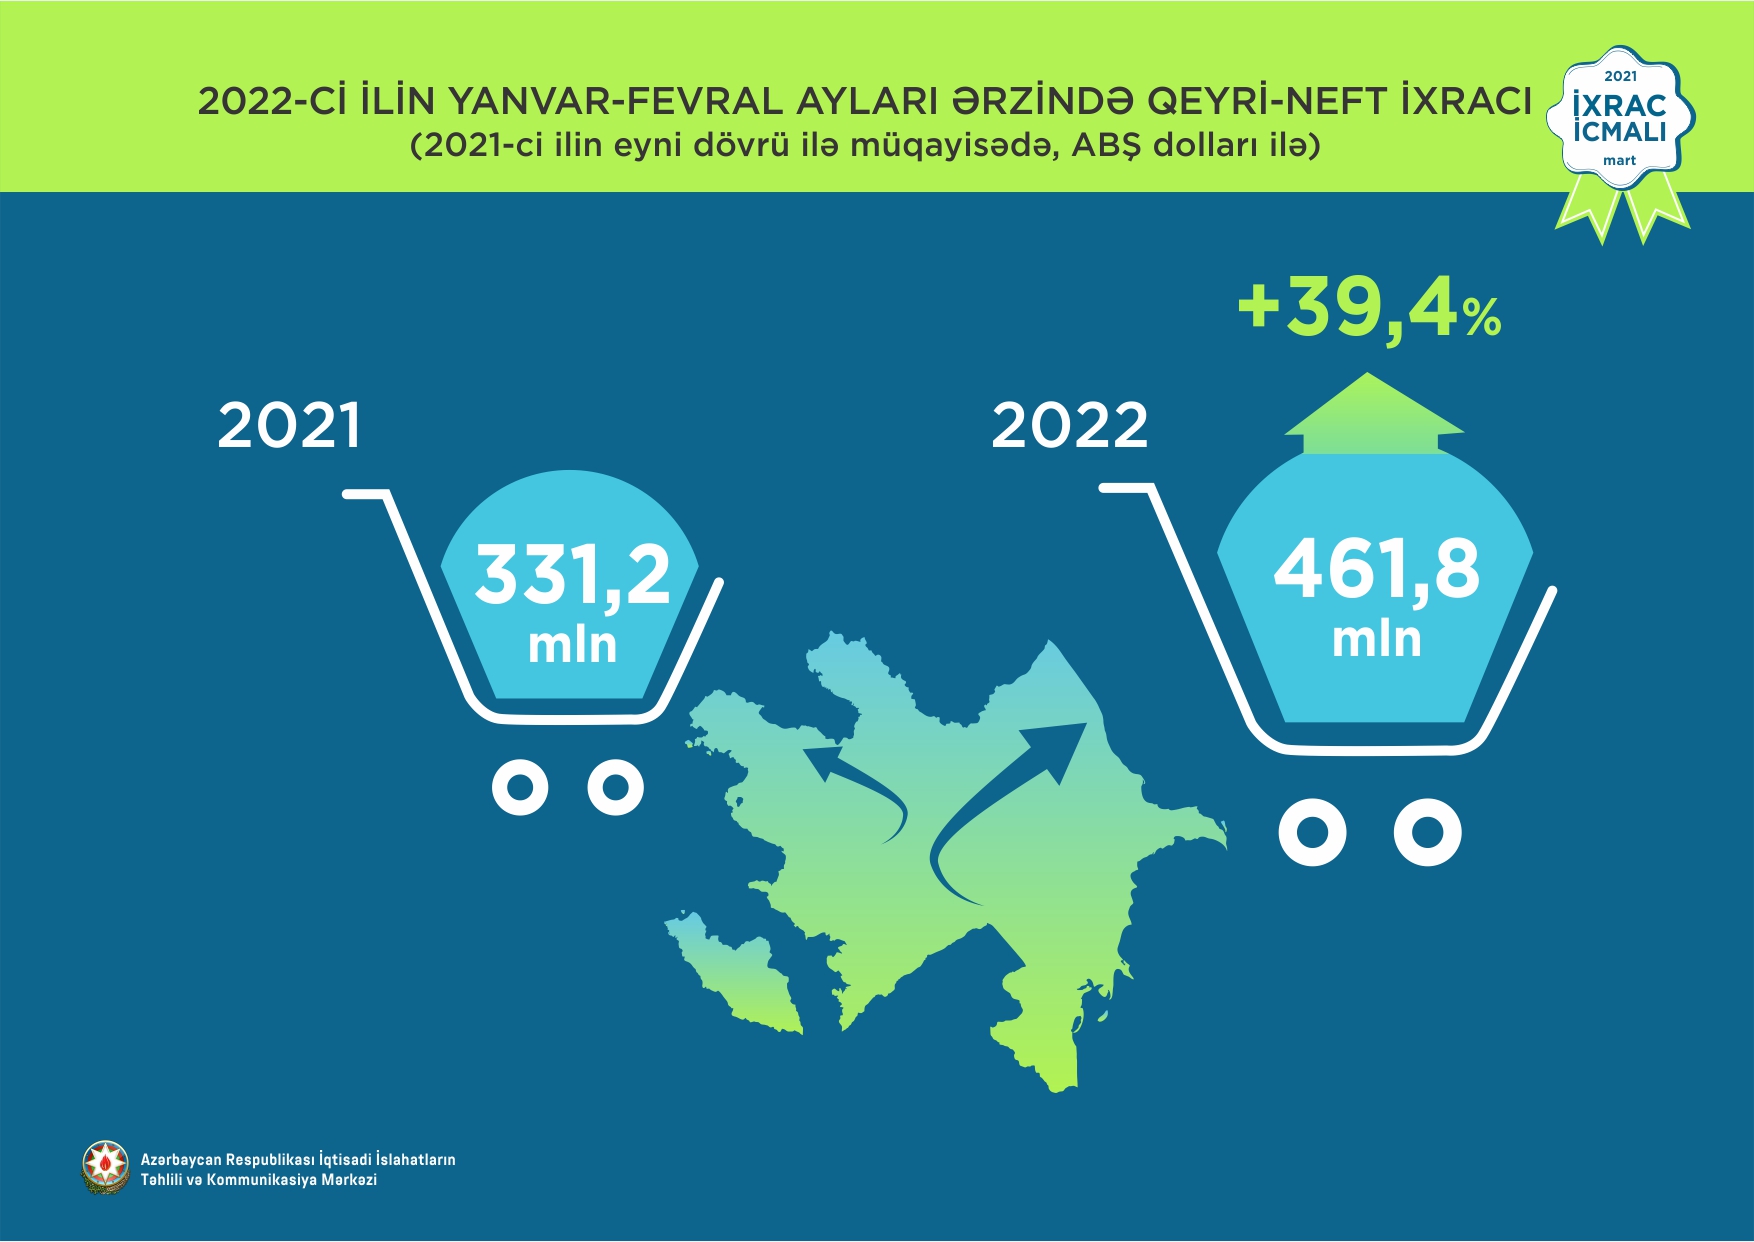 Non-oil exports increased by 39.4% to reach 461.8 million USD accourdong to the March issue of Exports Review